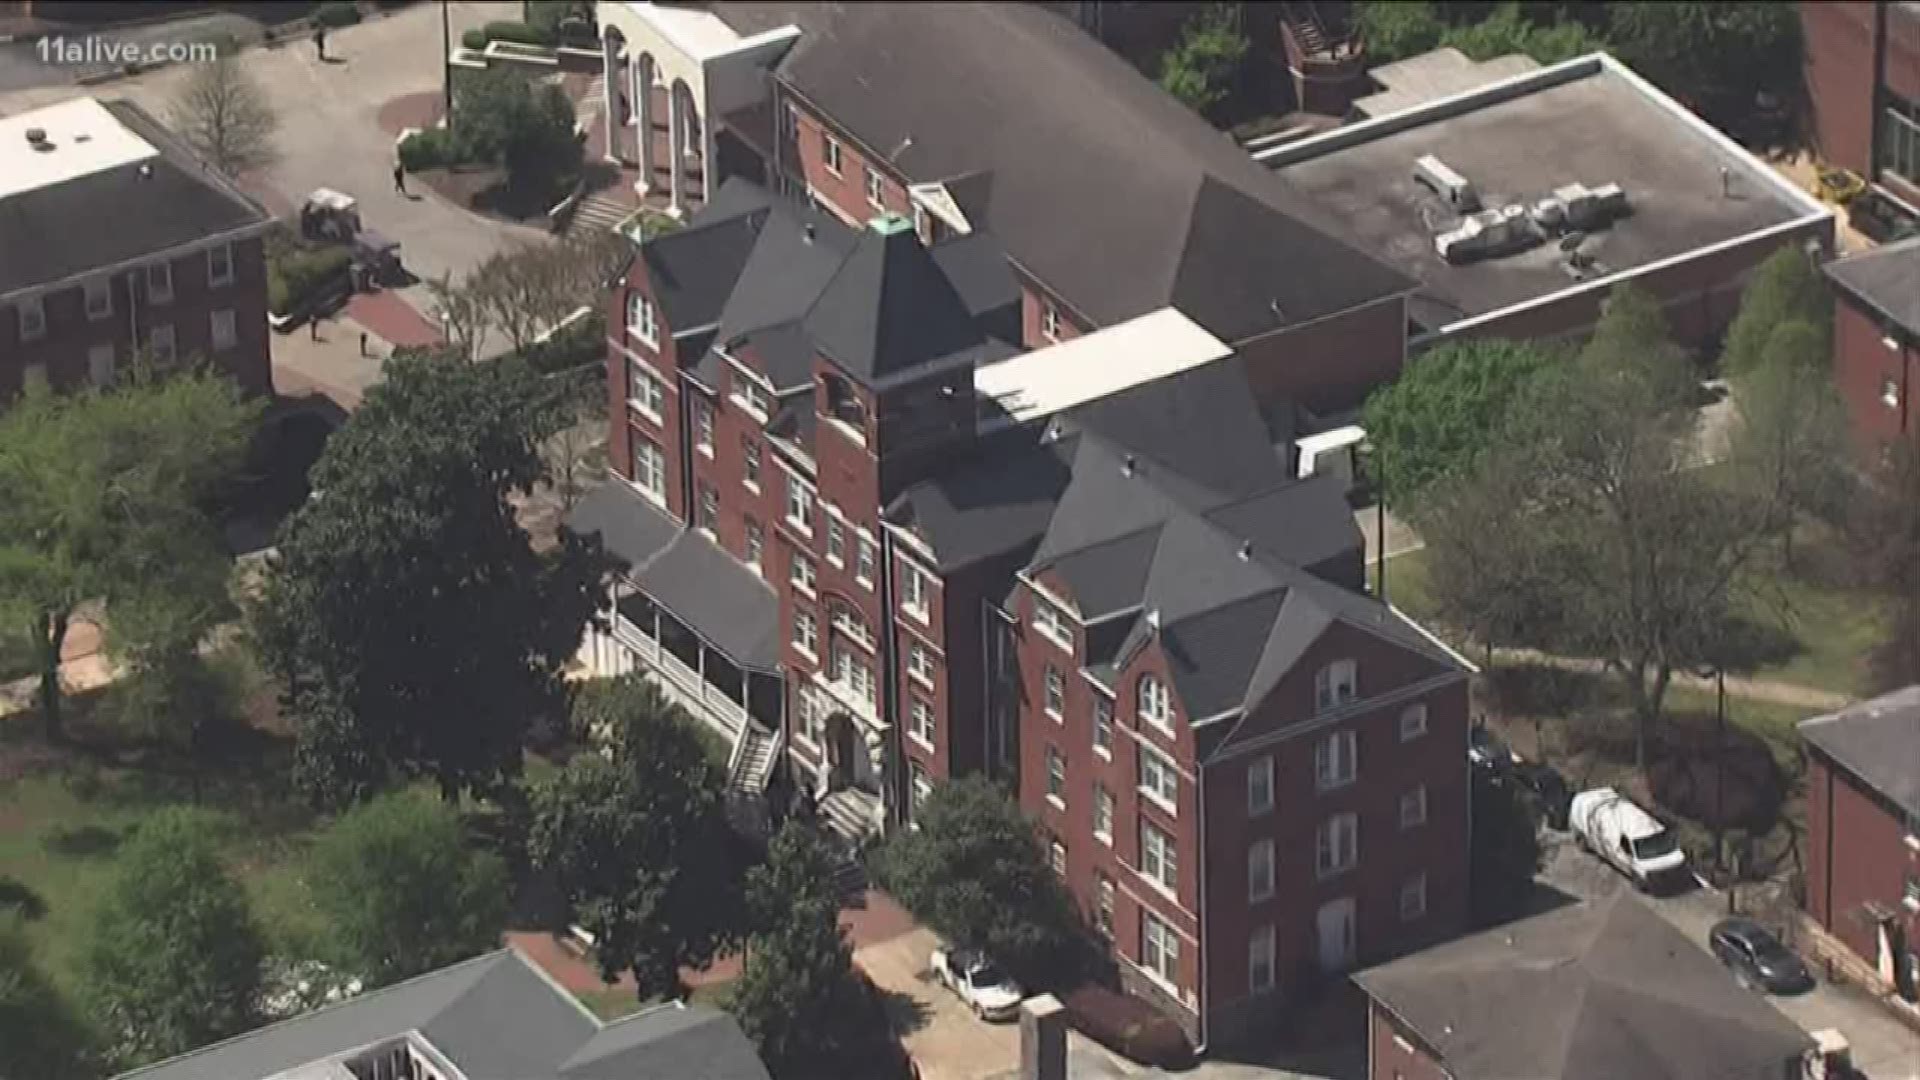 This trio of Historically Black Colleges and University is also known as the Atlanta University Center. The hate group said they are not please with changes Morehouse College plans to make next year.